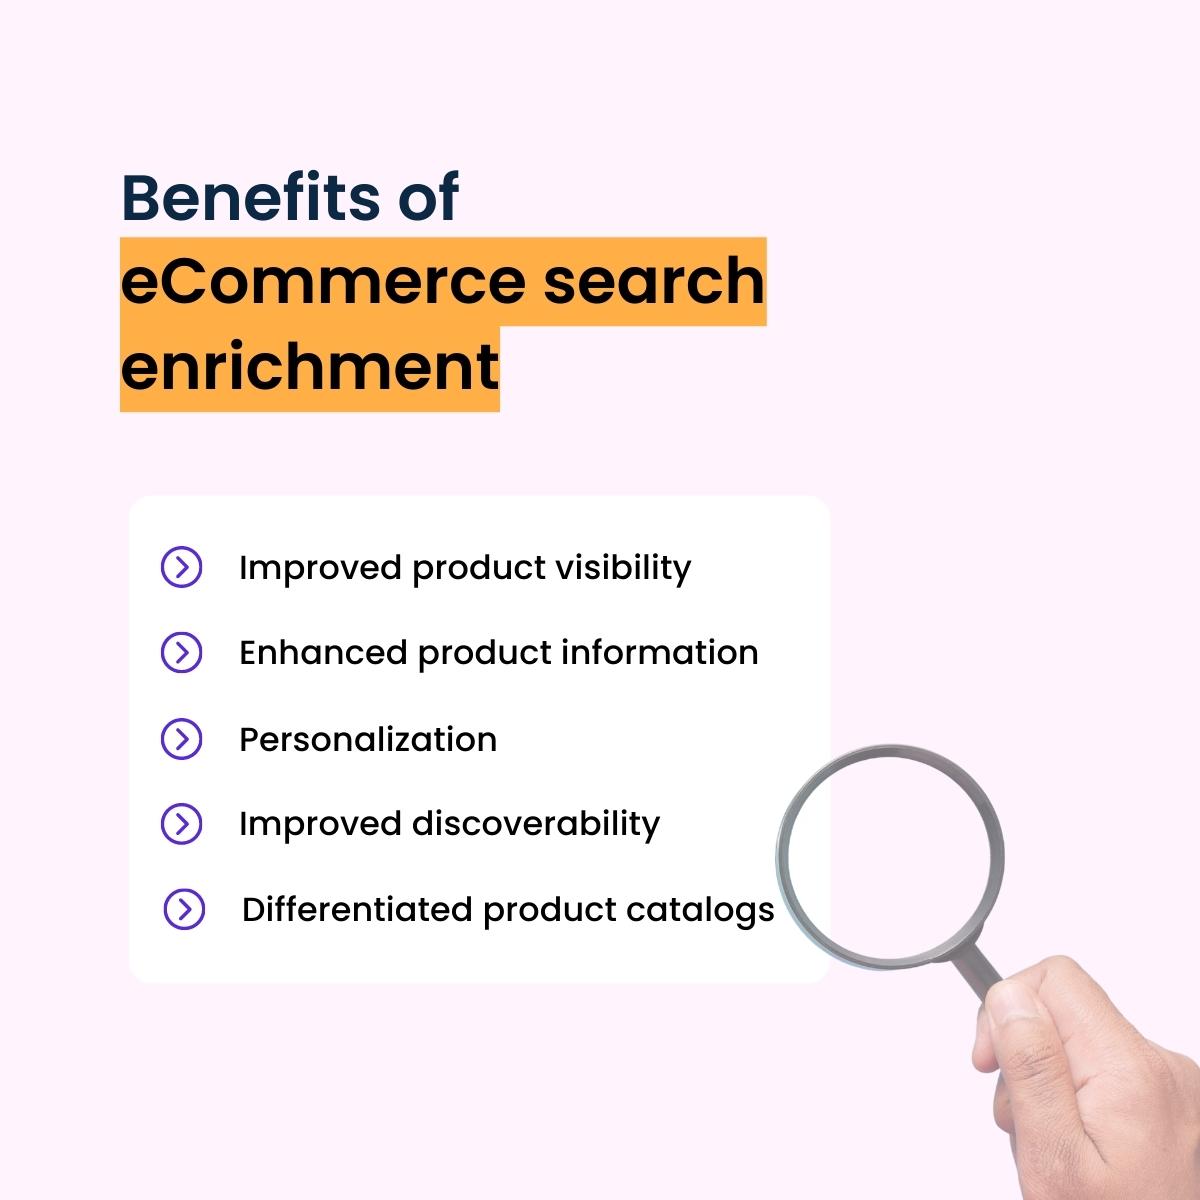 A list of the benefits of eCommerce search enrichment with a picture of a magnifying glass